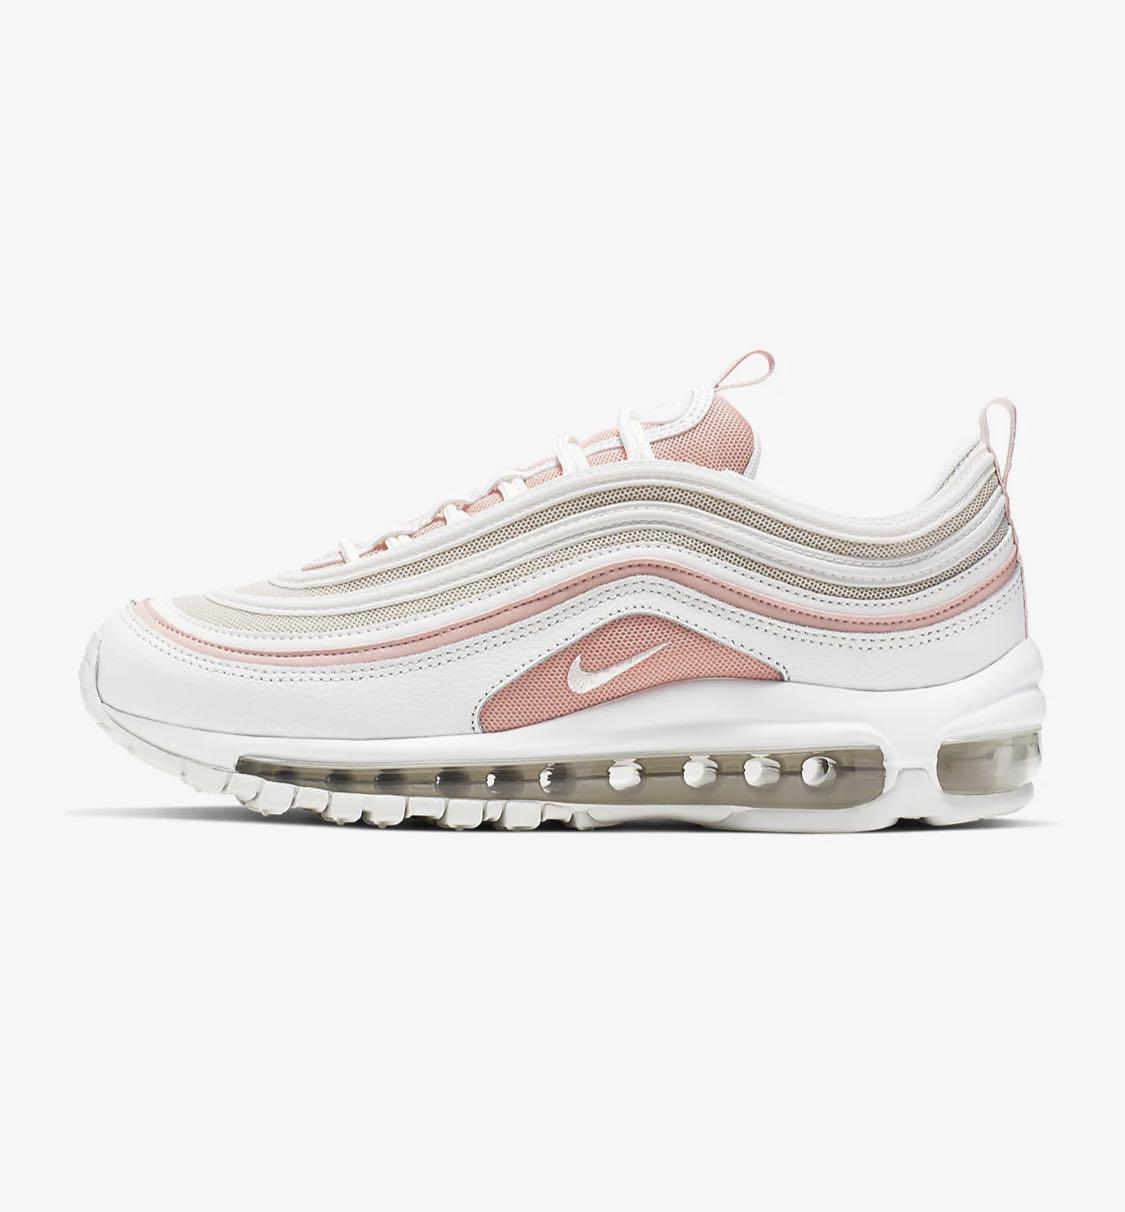 Air Max 97 Peach And White For Sale Off 69%